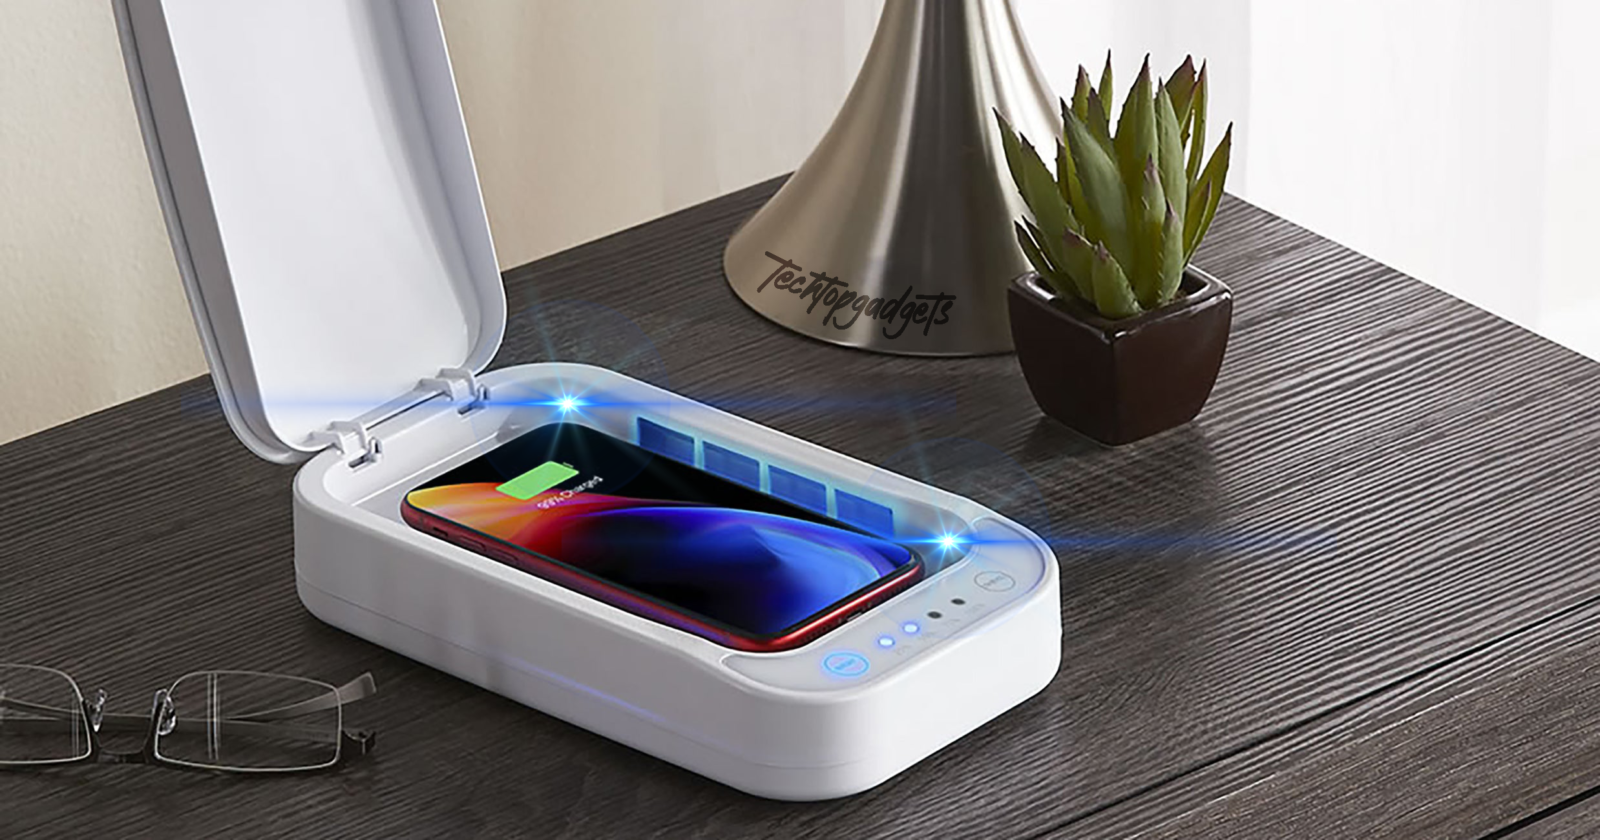 The PhoneSoap Pro shines as the best phone sanitizer, elegantly designed to keep your devices free from germs in a home setting.